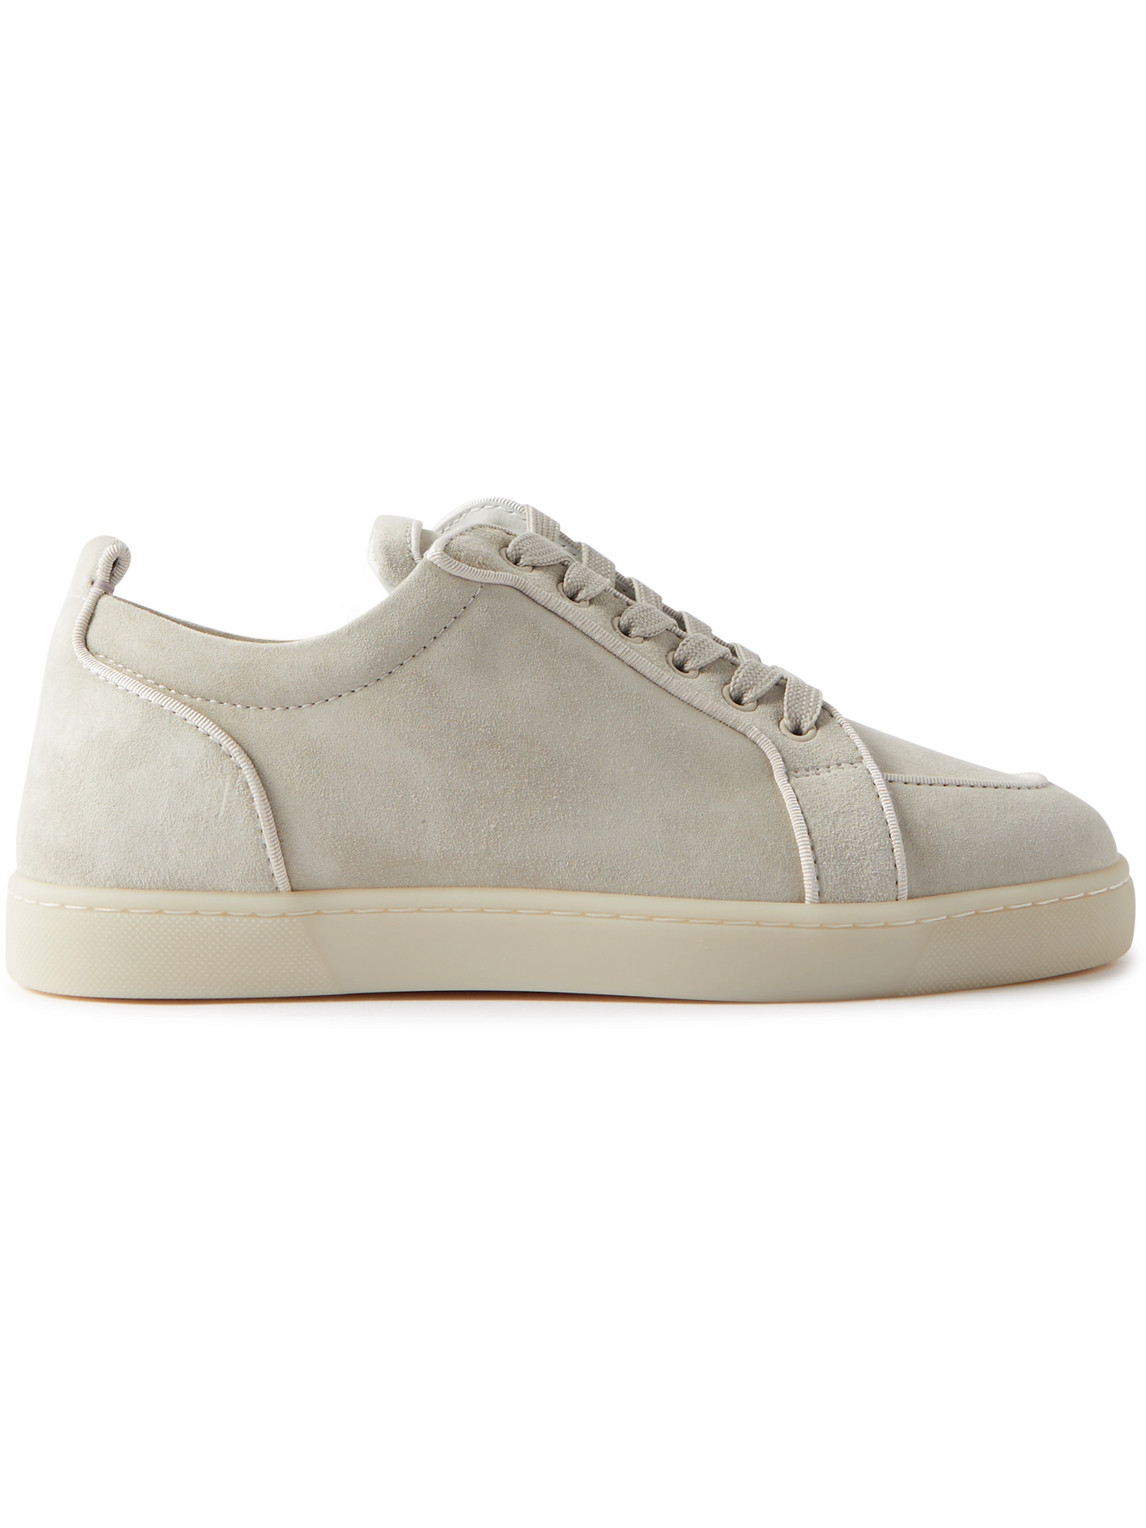 Christian Louboutin Rantulow Suede Sneakers In Gray